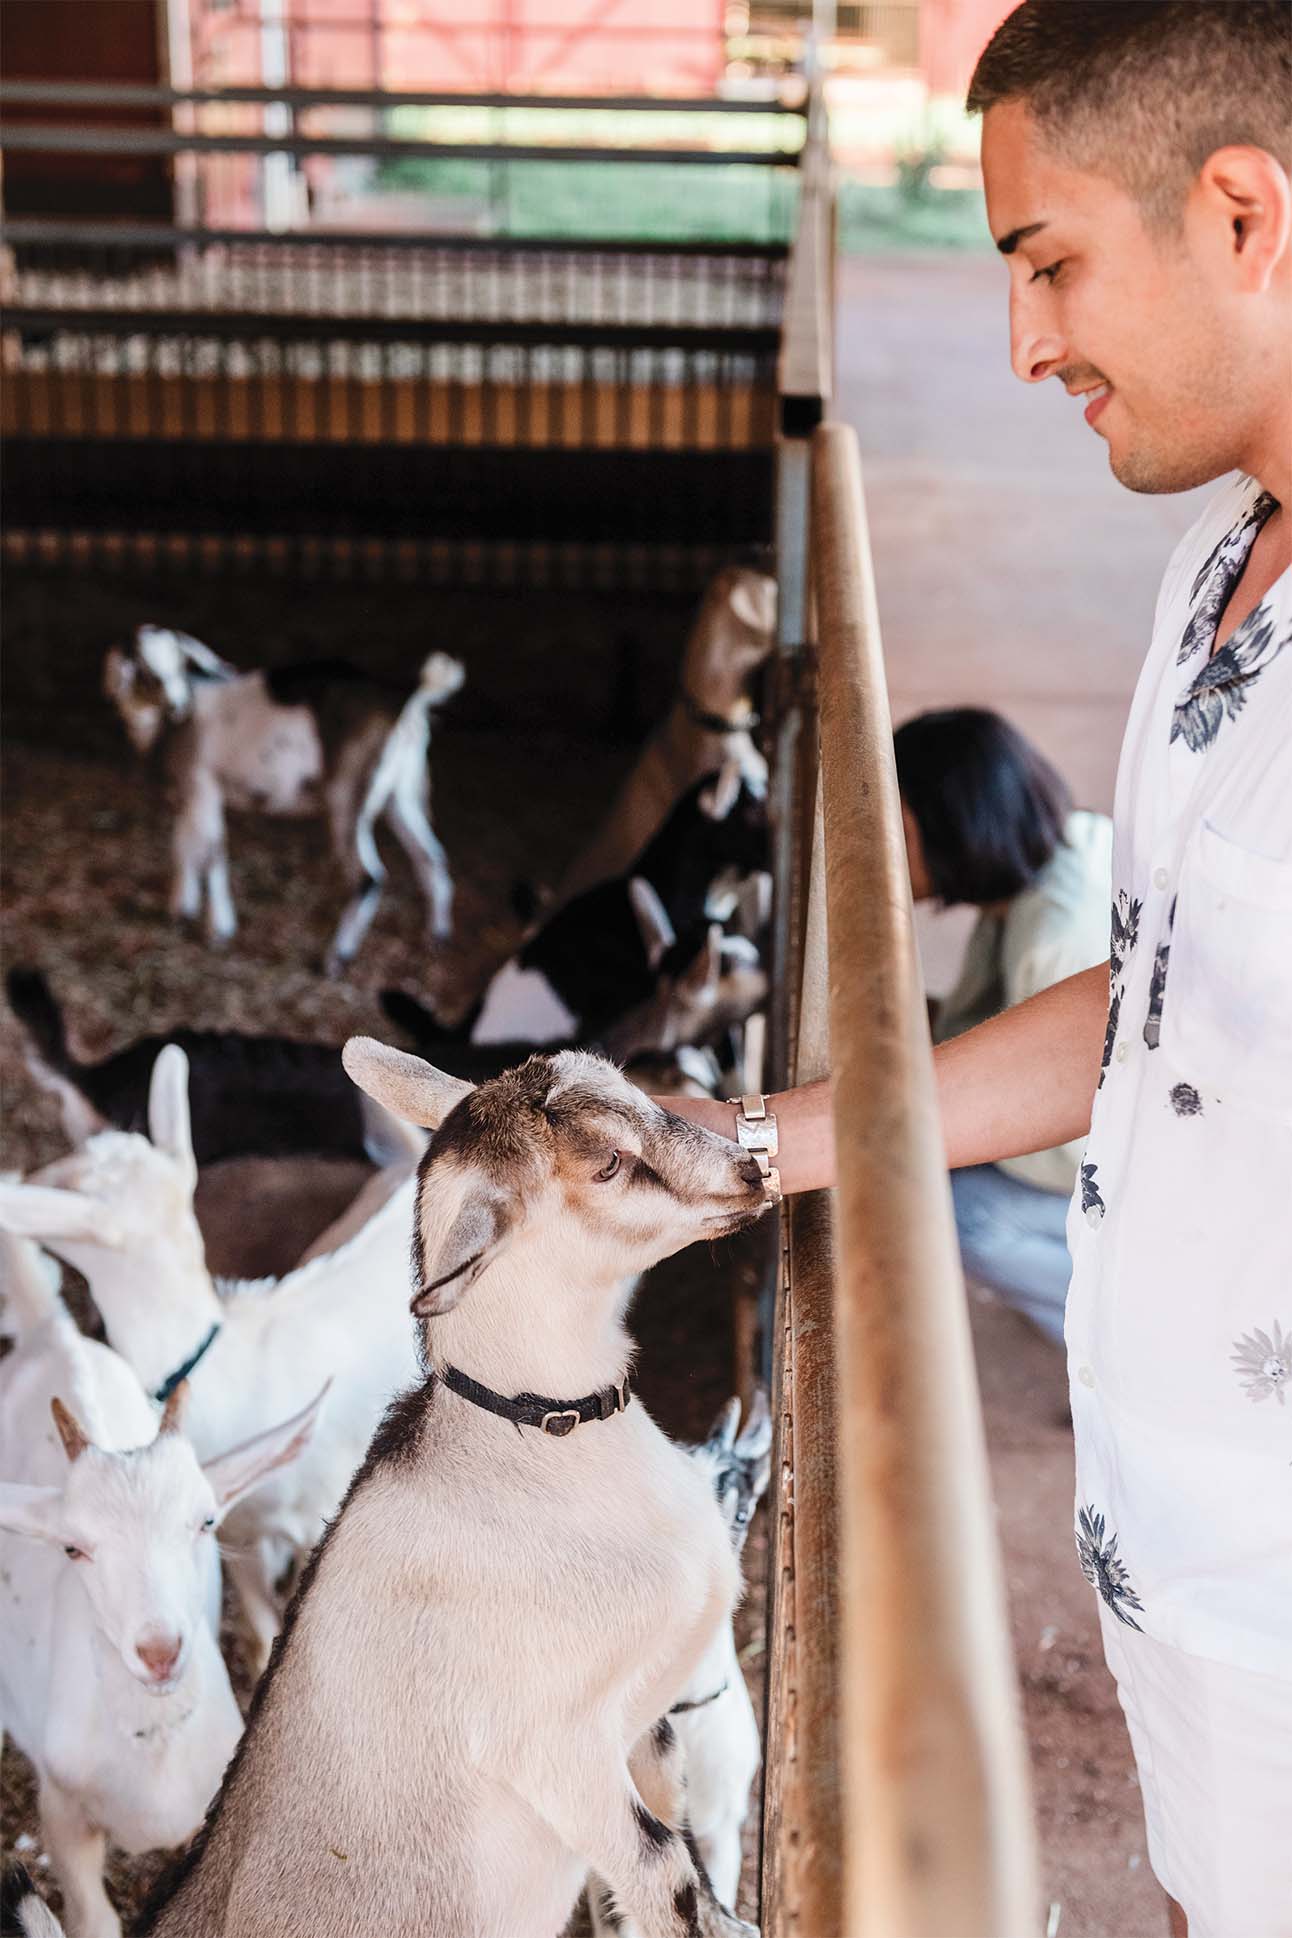 A person in a white shirt with a floral pattern feeding a brown and white goat at a wooden fence, with a group of goats in the background inside a sheltered pen.